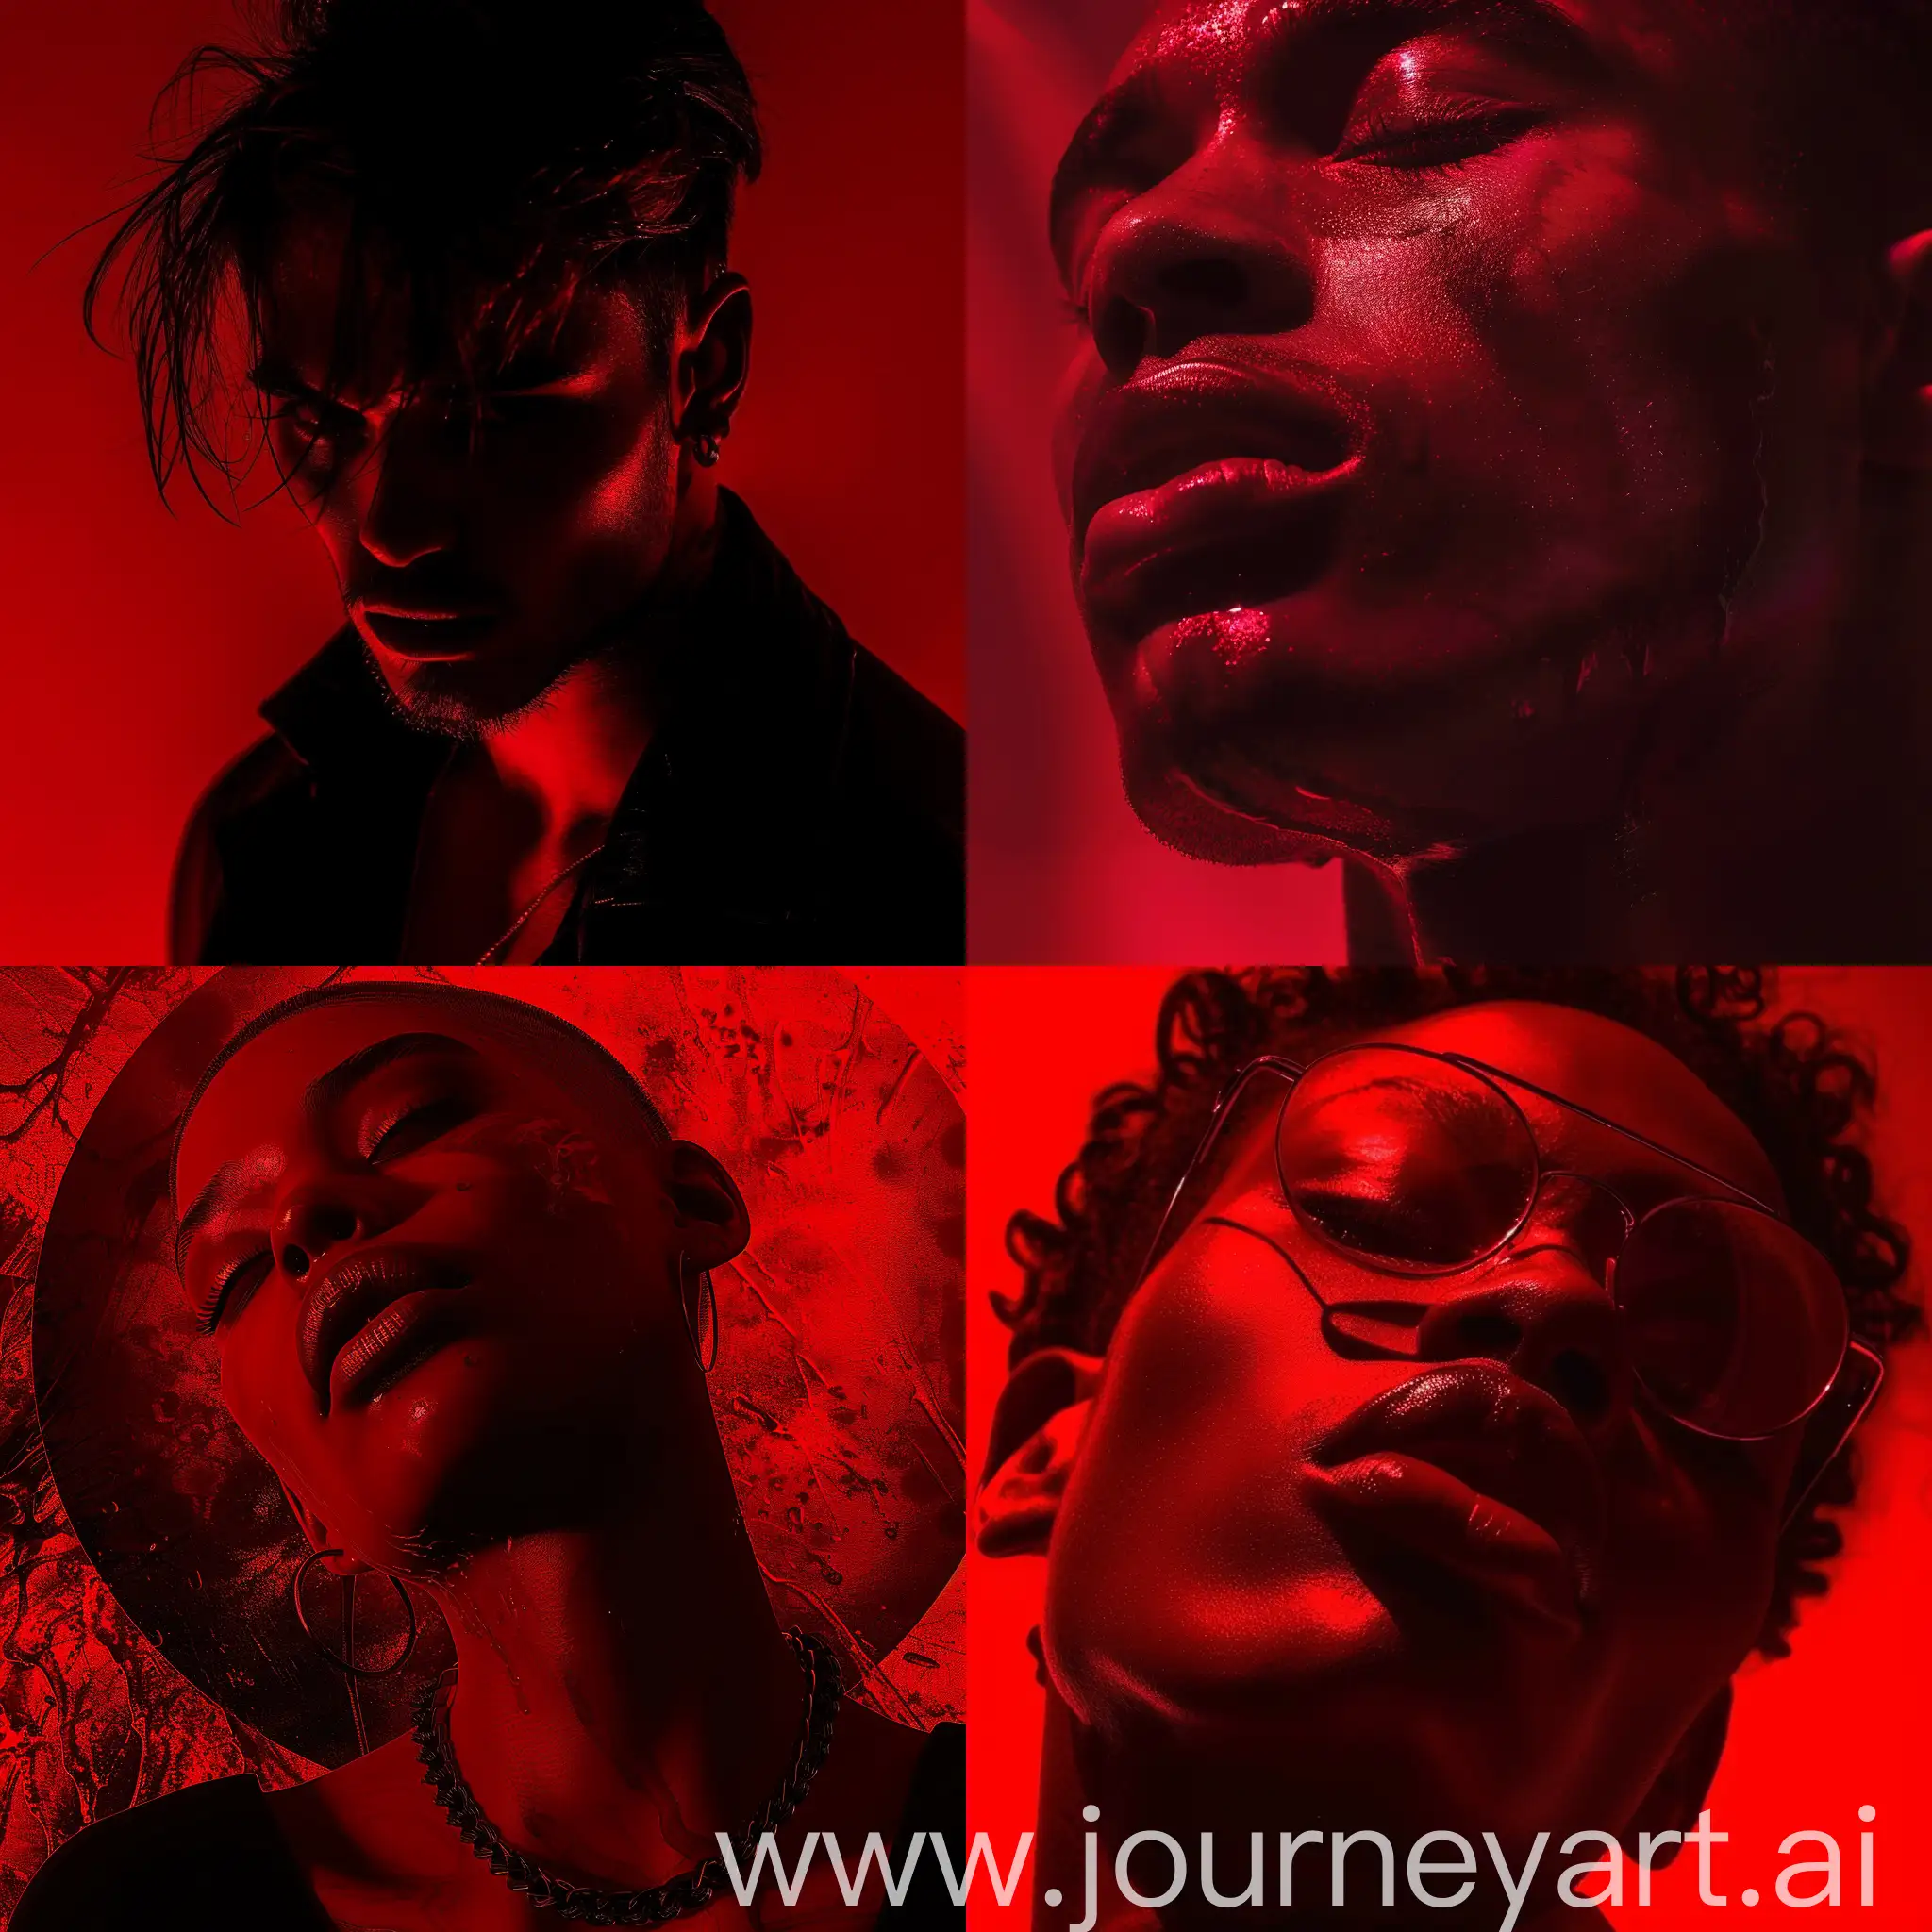 sexy, masculine, feminine, intriguing, exotic, mysterious and melancholic portrait in a red dark rnb theme